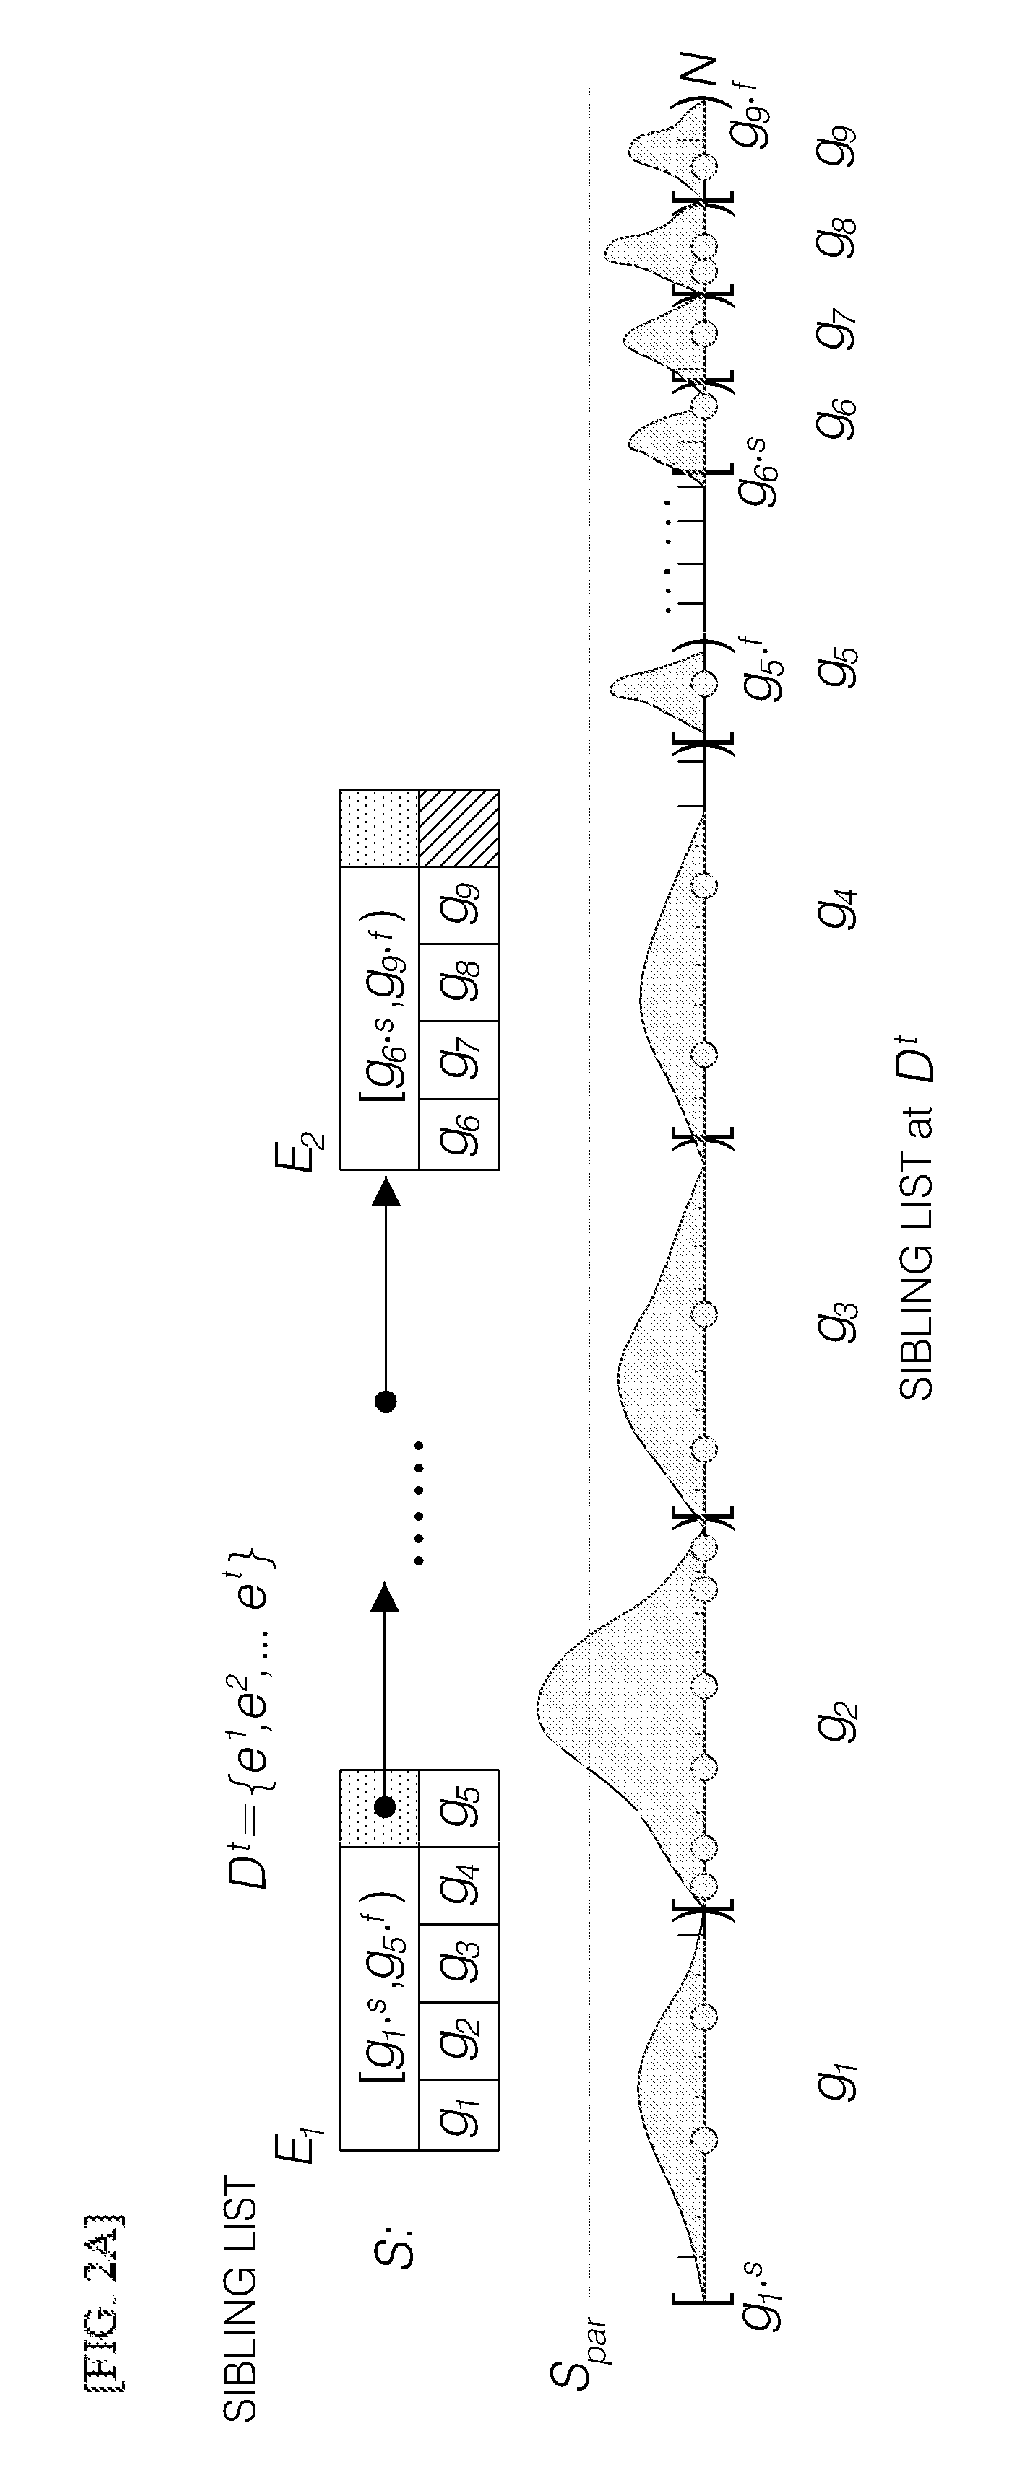 Method and system of clustering for multi-dimensional data streams